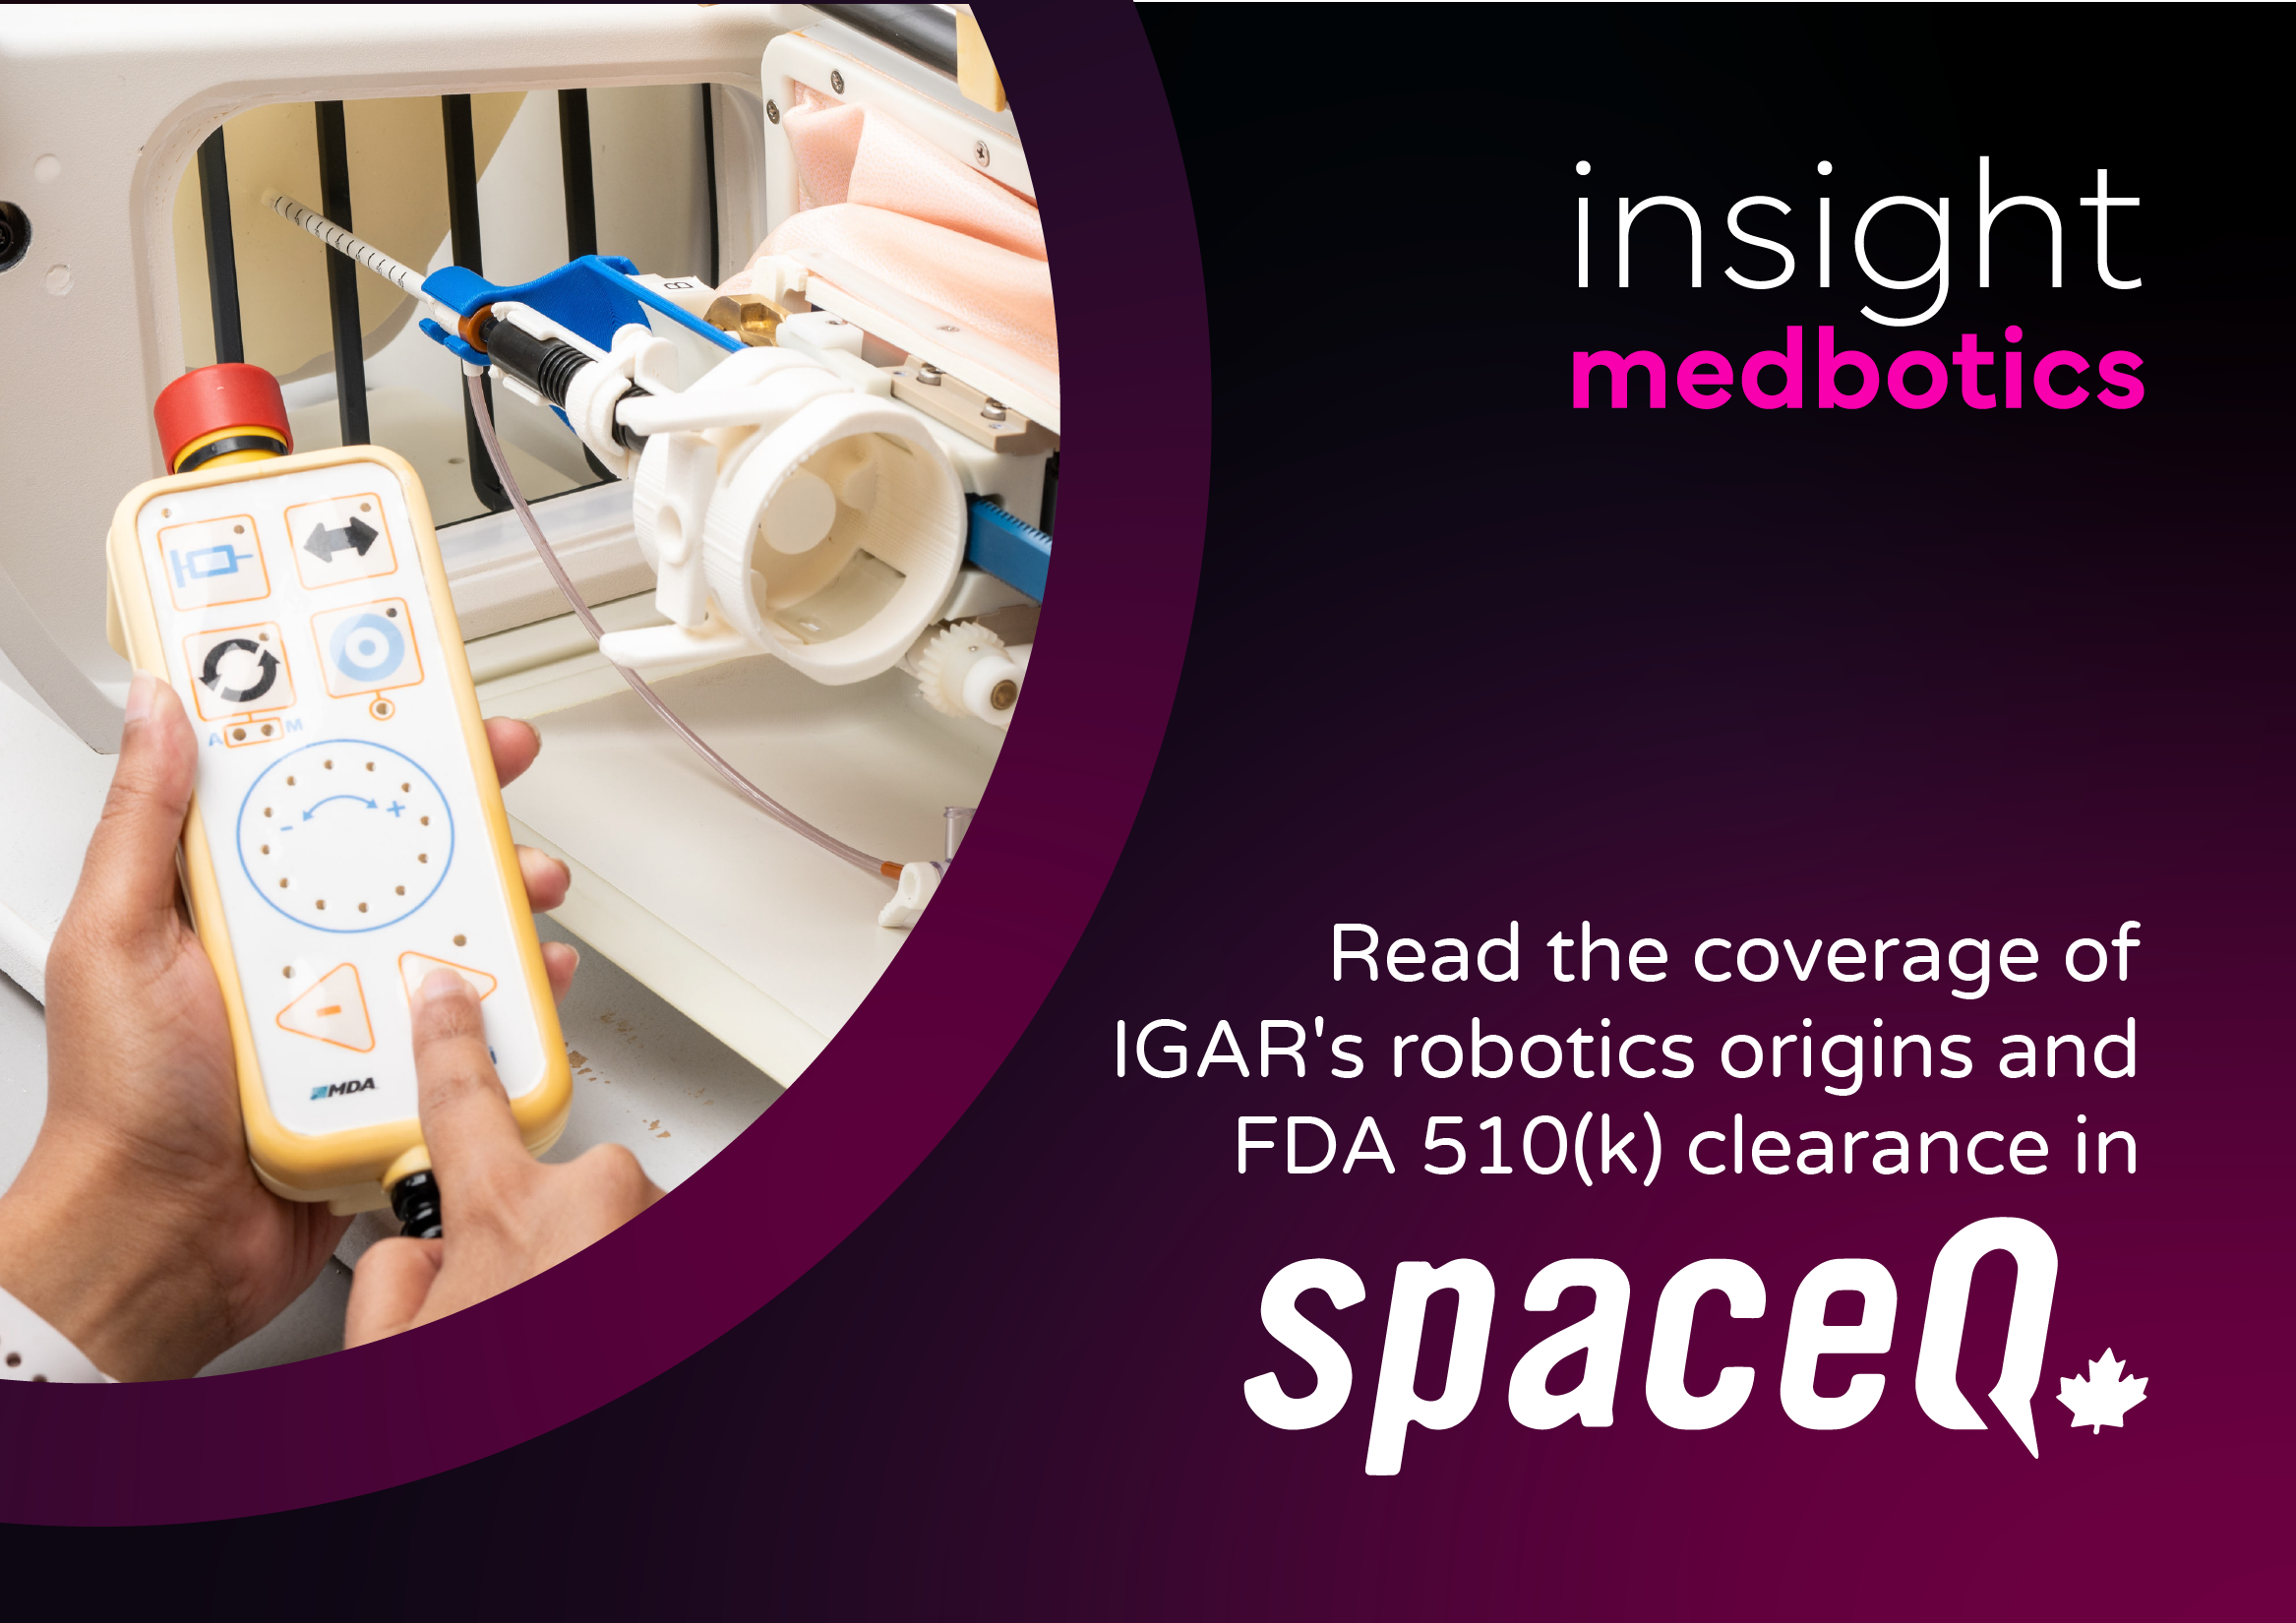 Inset circular photo shows IGAR robotic system demonstrating a breast biopsy indication with a man's hand holding the control panel. On a magenta background, text reads 'Read the coverage of IGAR's robotic origins and successful FDA 510(k) clearance in SpaceQ